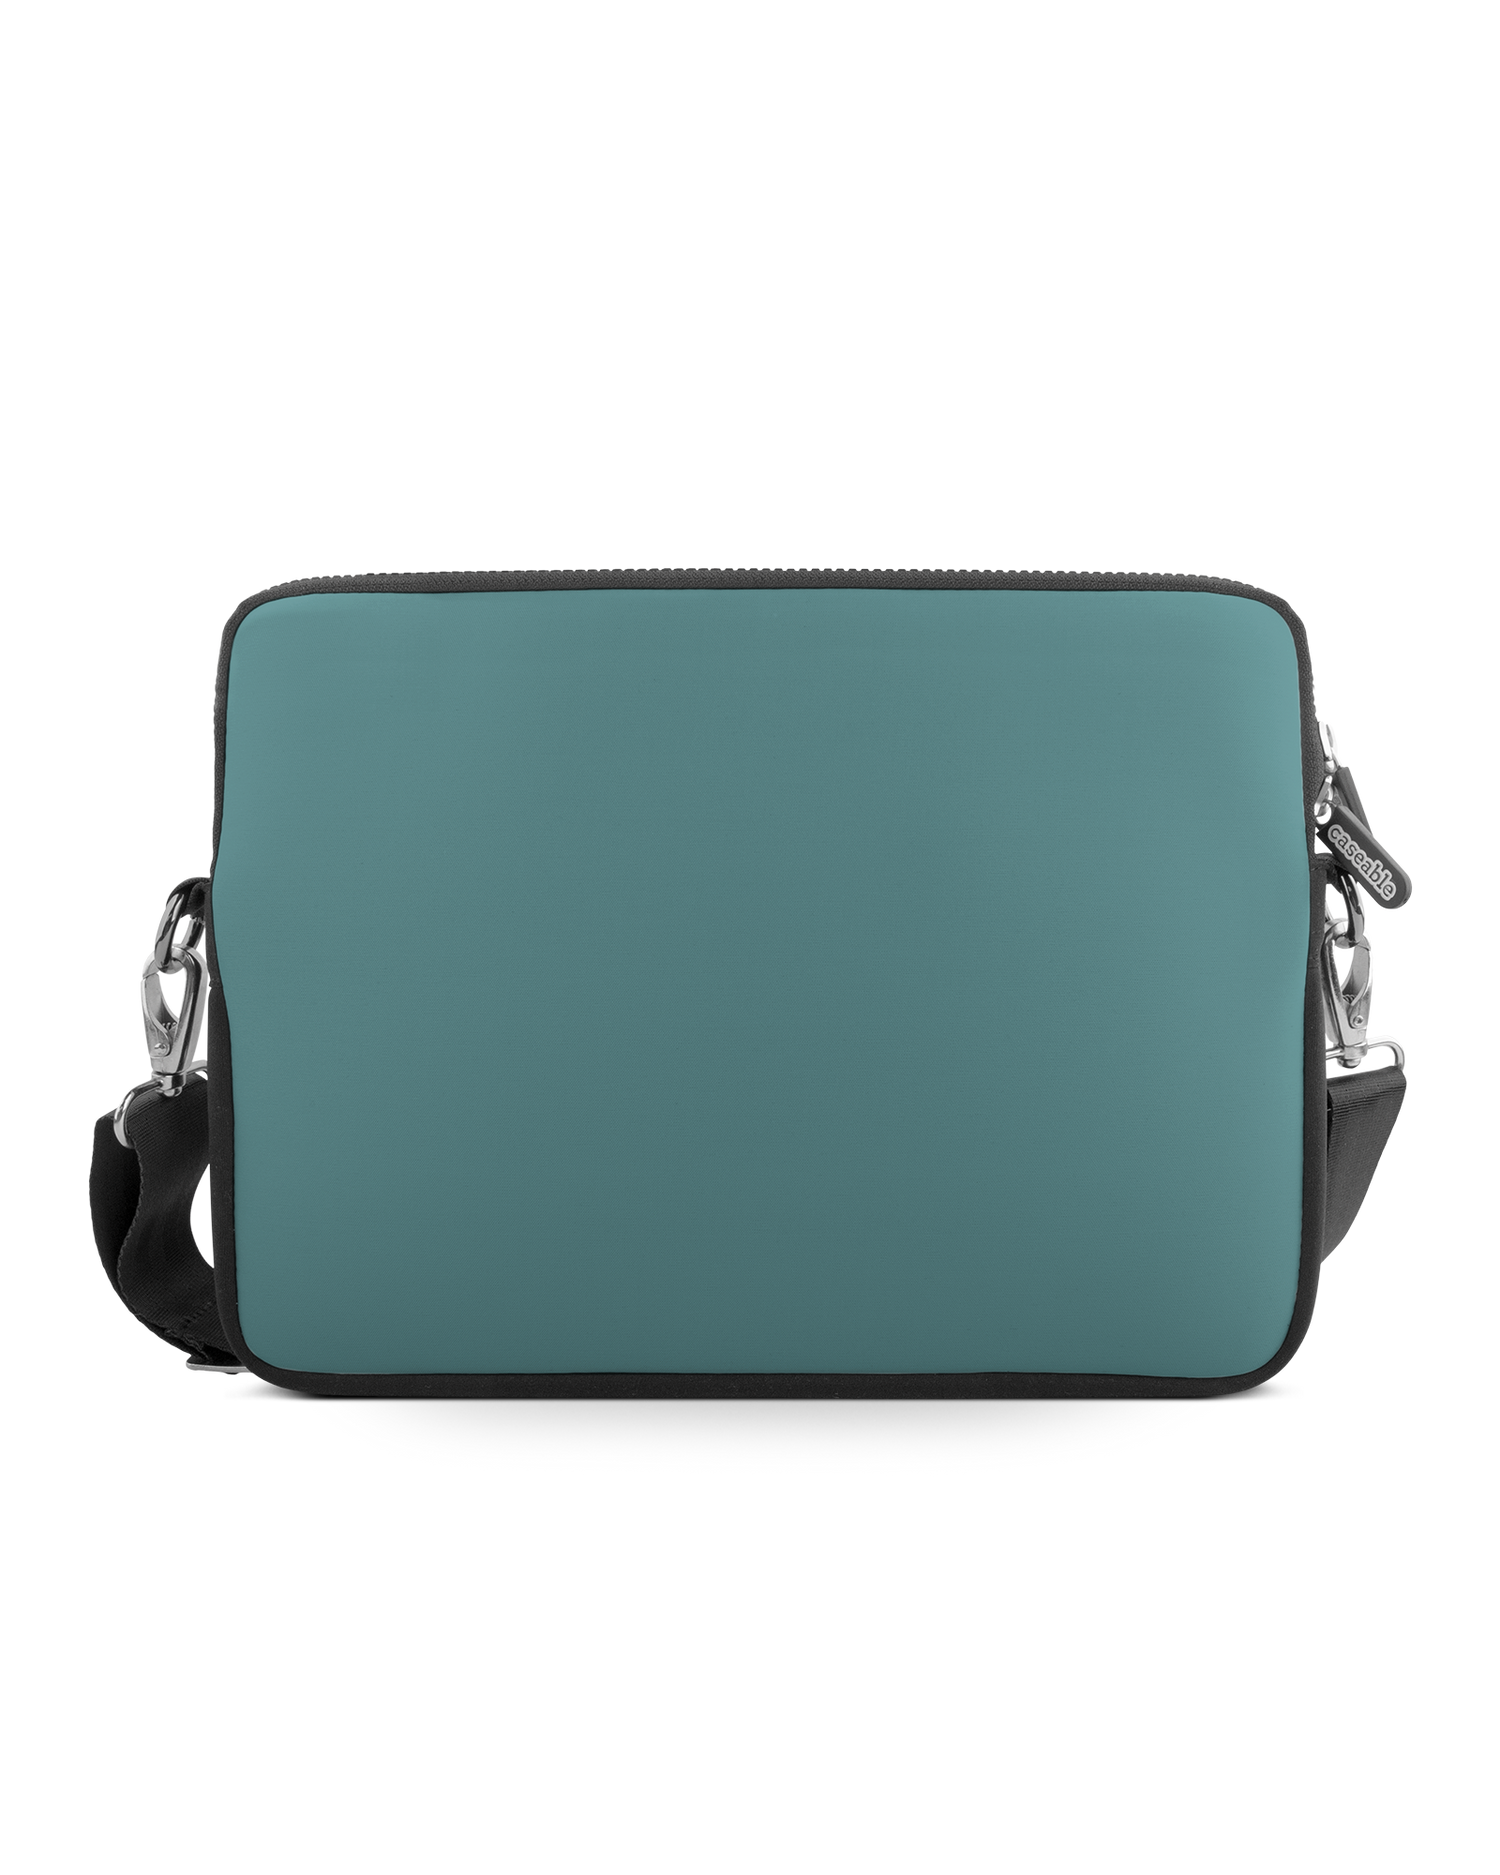 TURQUOISE Premium Laptop Bag 17 inch: Front View